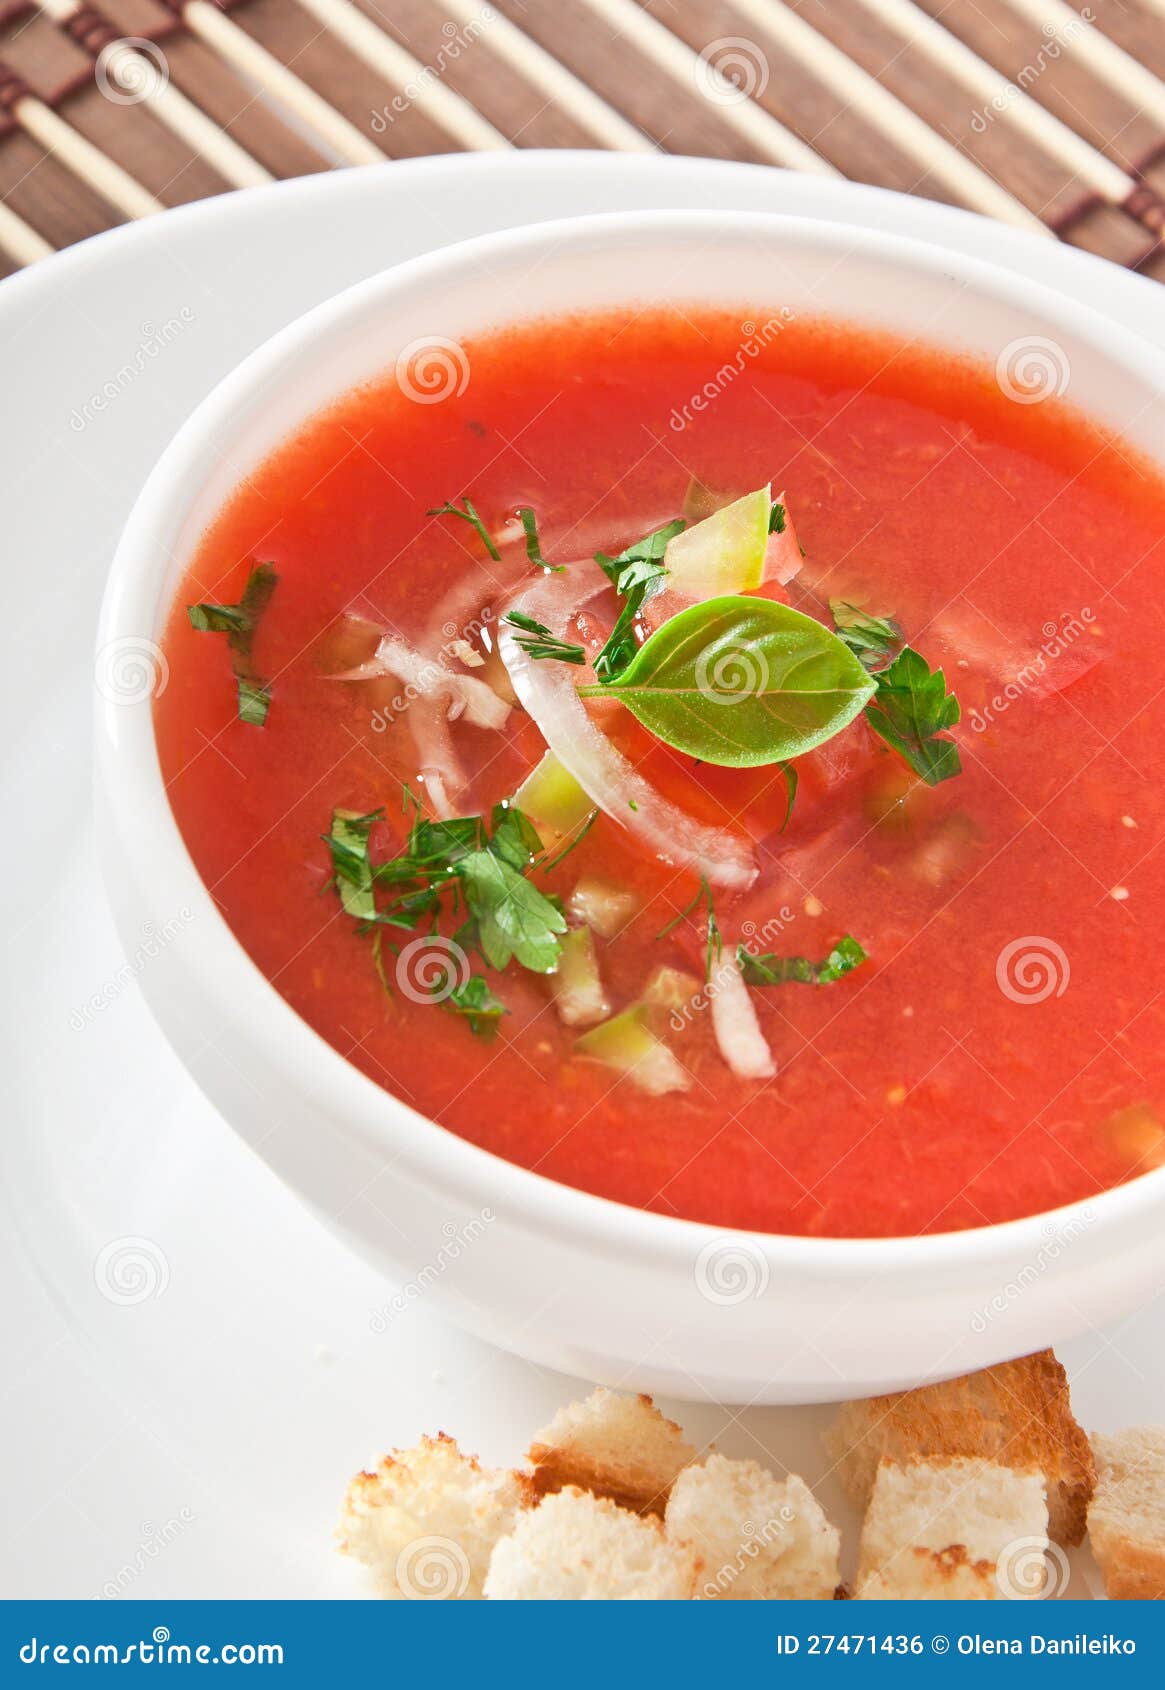 Gazpacho soup stock photo. Image of cucumber, portion - 27471436